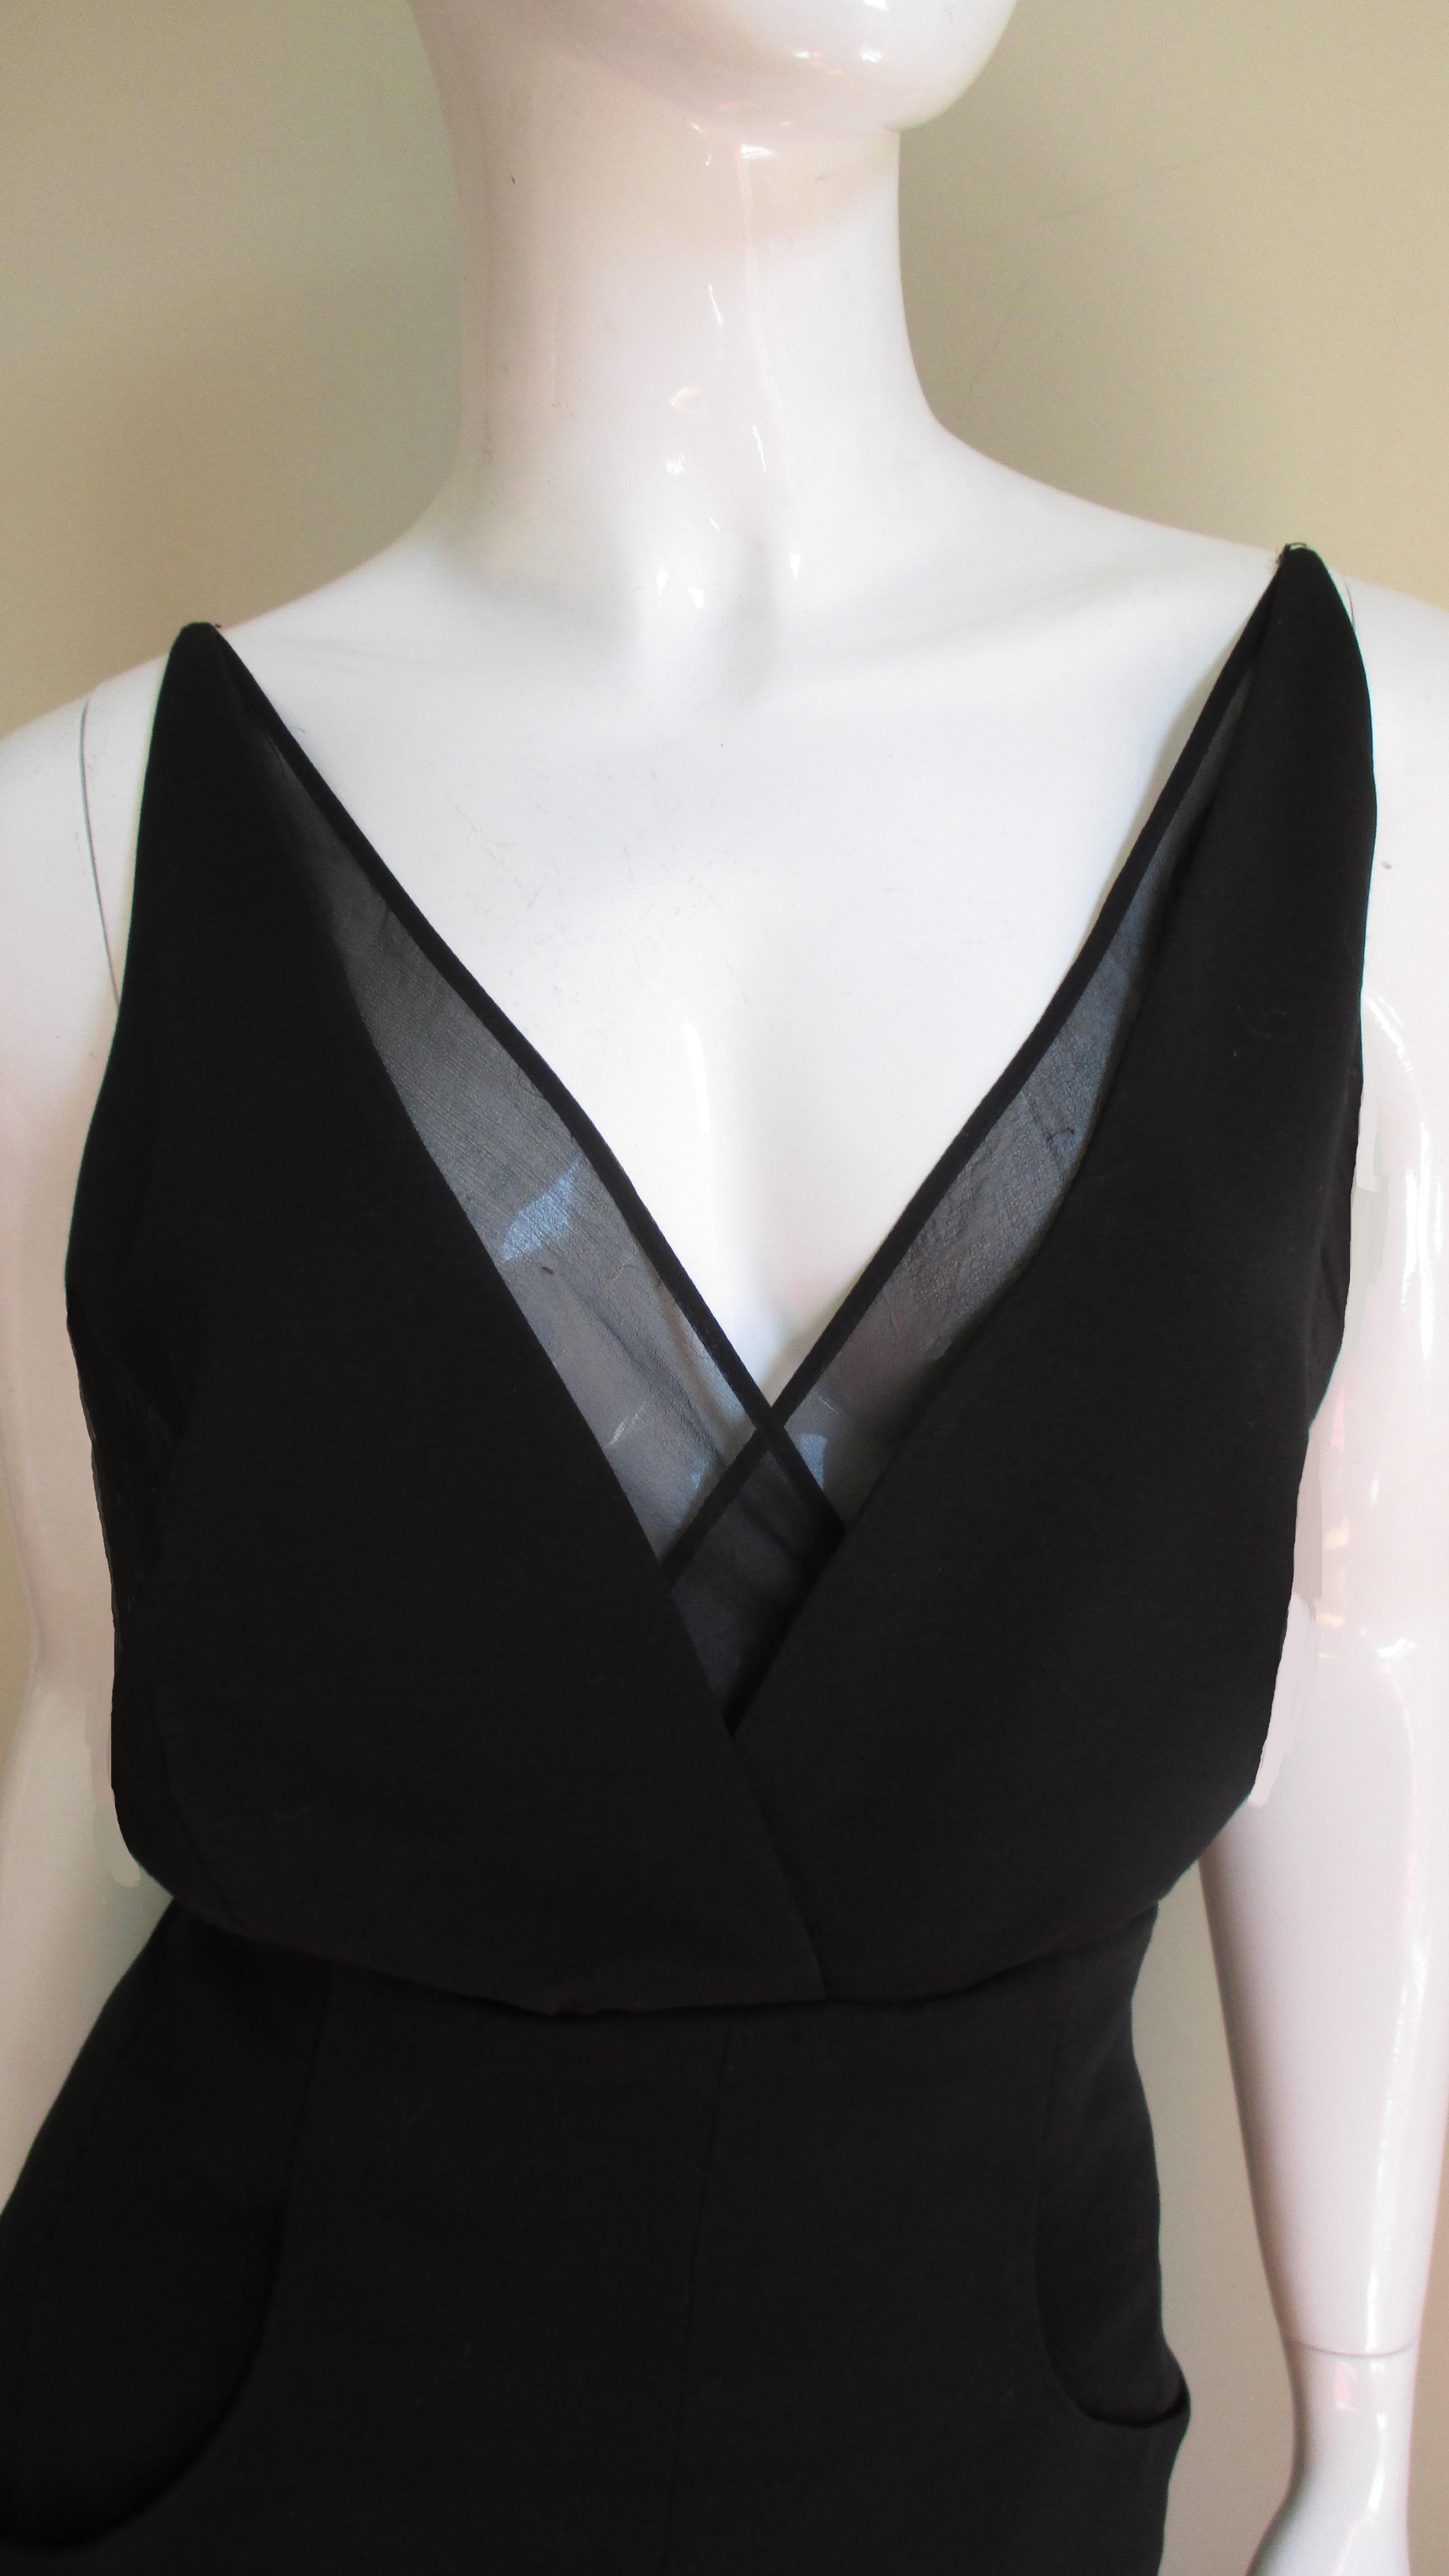 Karl Lagerfeld Handkerchief Hem Slip Dress 1990s In Excellent Condition For Sale In Water Mill, NY